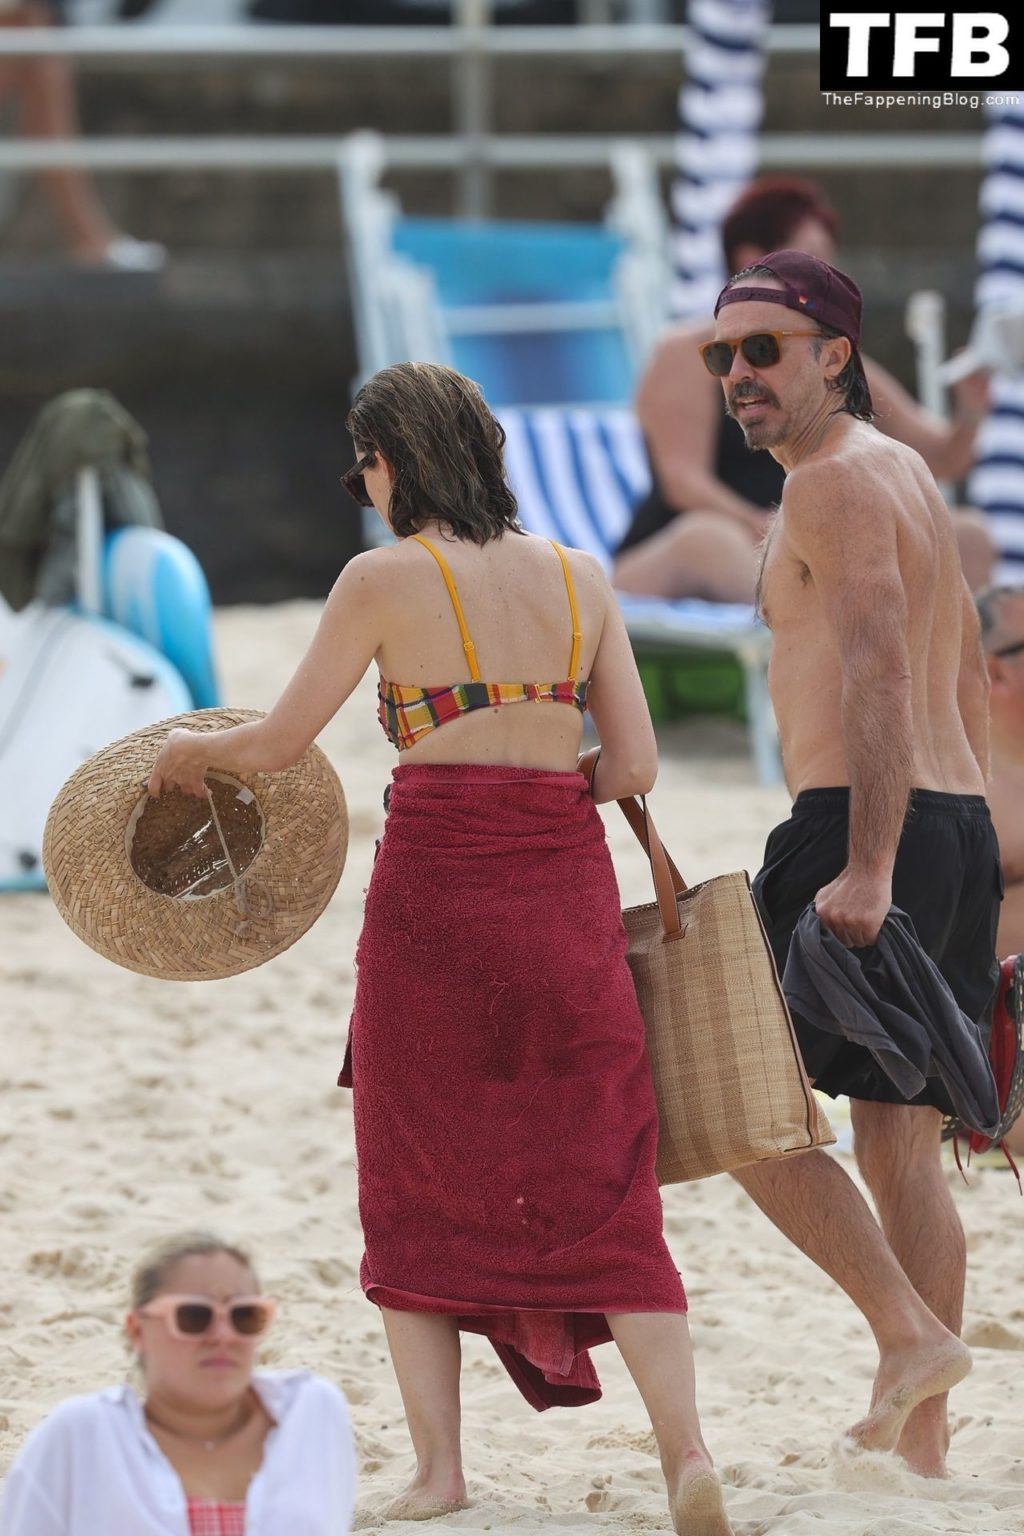 Rose Byrne Sexy The Fappening Blog 87 1024x1536 - Rose Byrne & Kick Gurry Enjoy a Day on the Beach in Sydney (90 Photos)